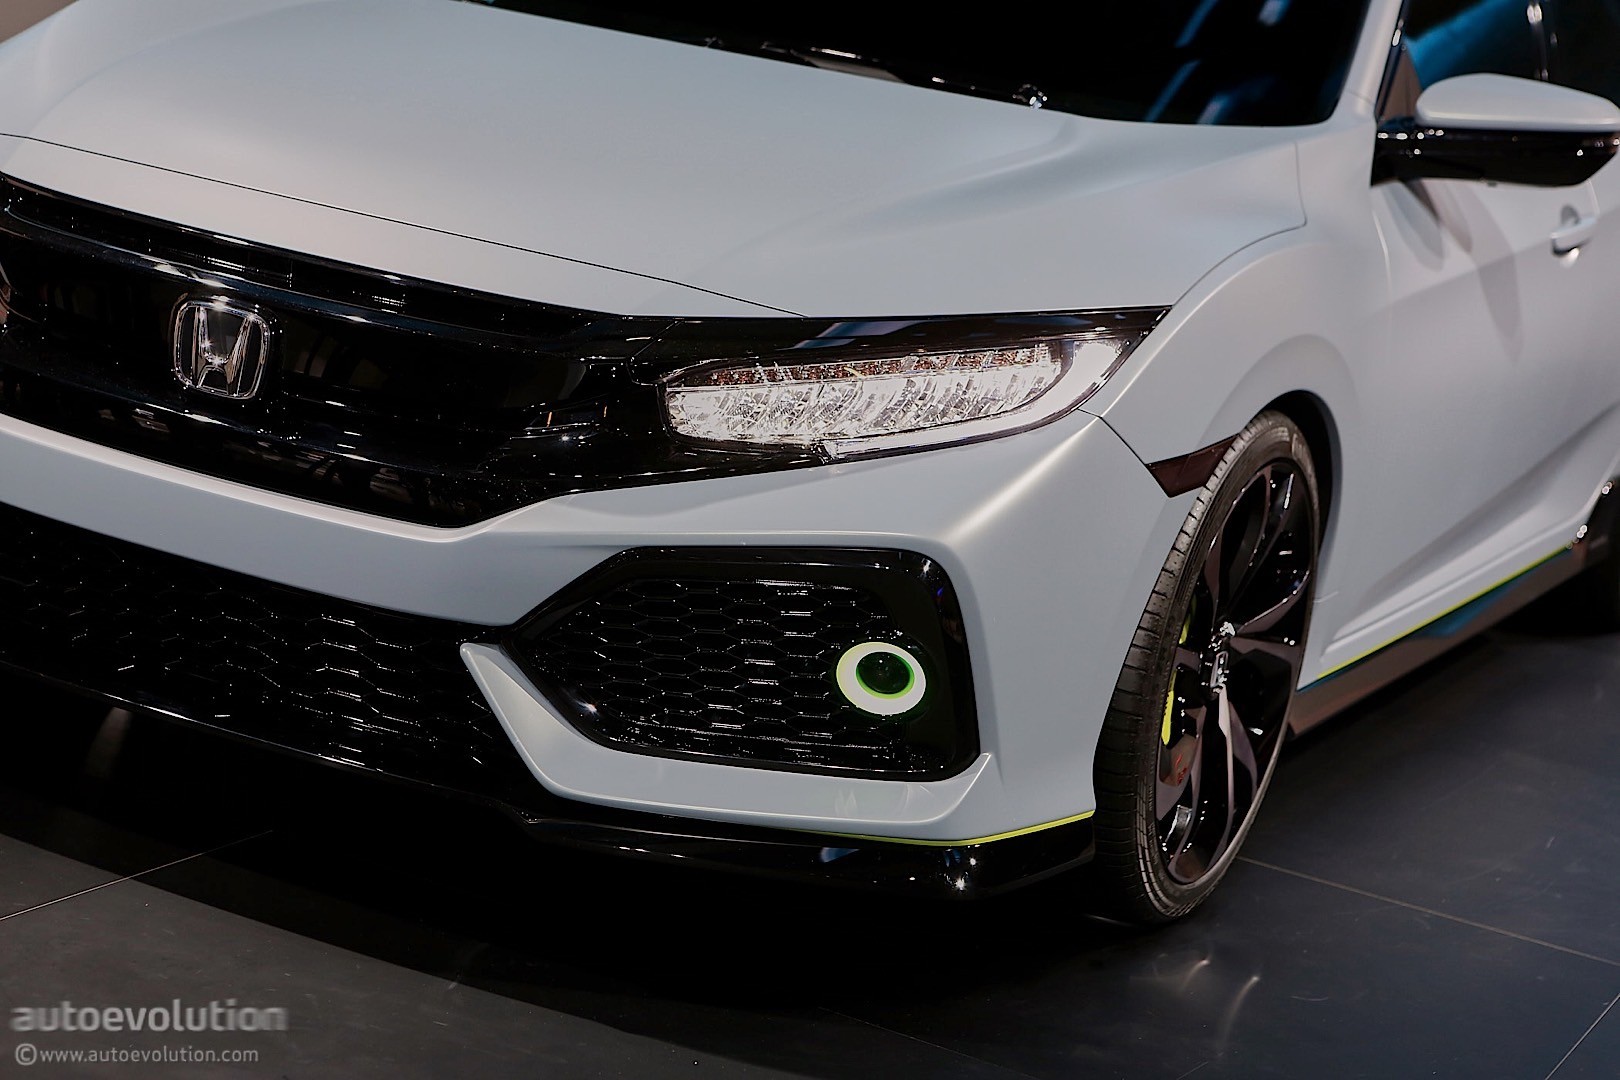 honda-civic-hatchback-coming-to-new-york-civic-si-and-new-type-r-in-2017_11.jpg